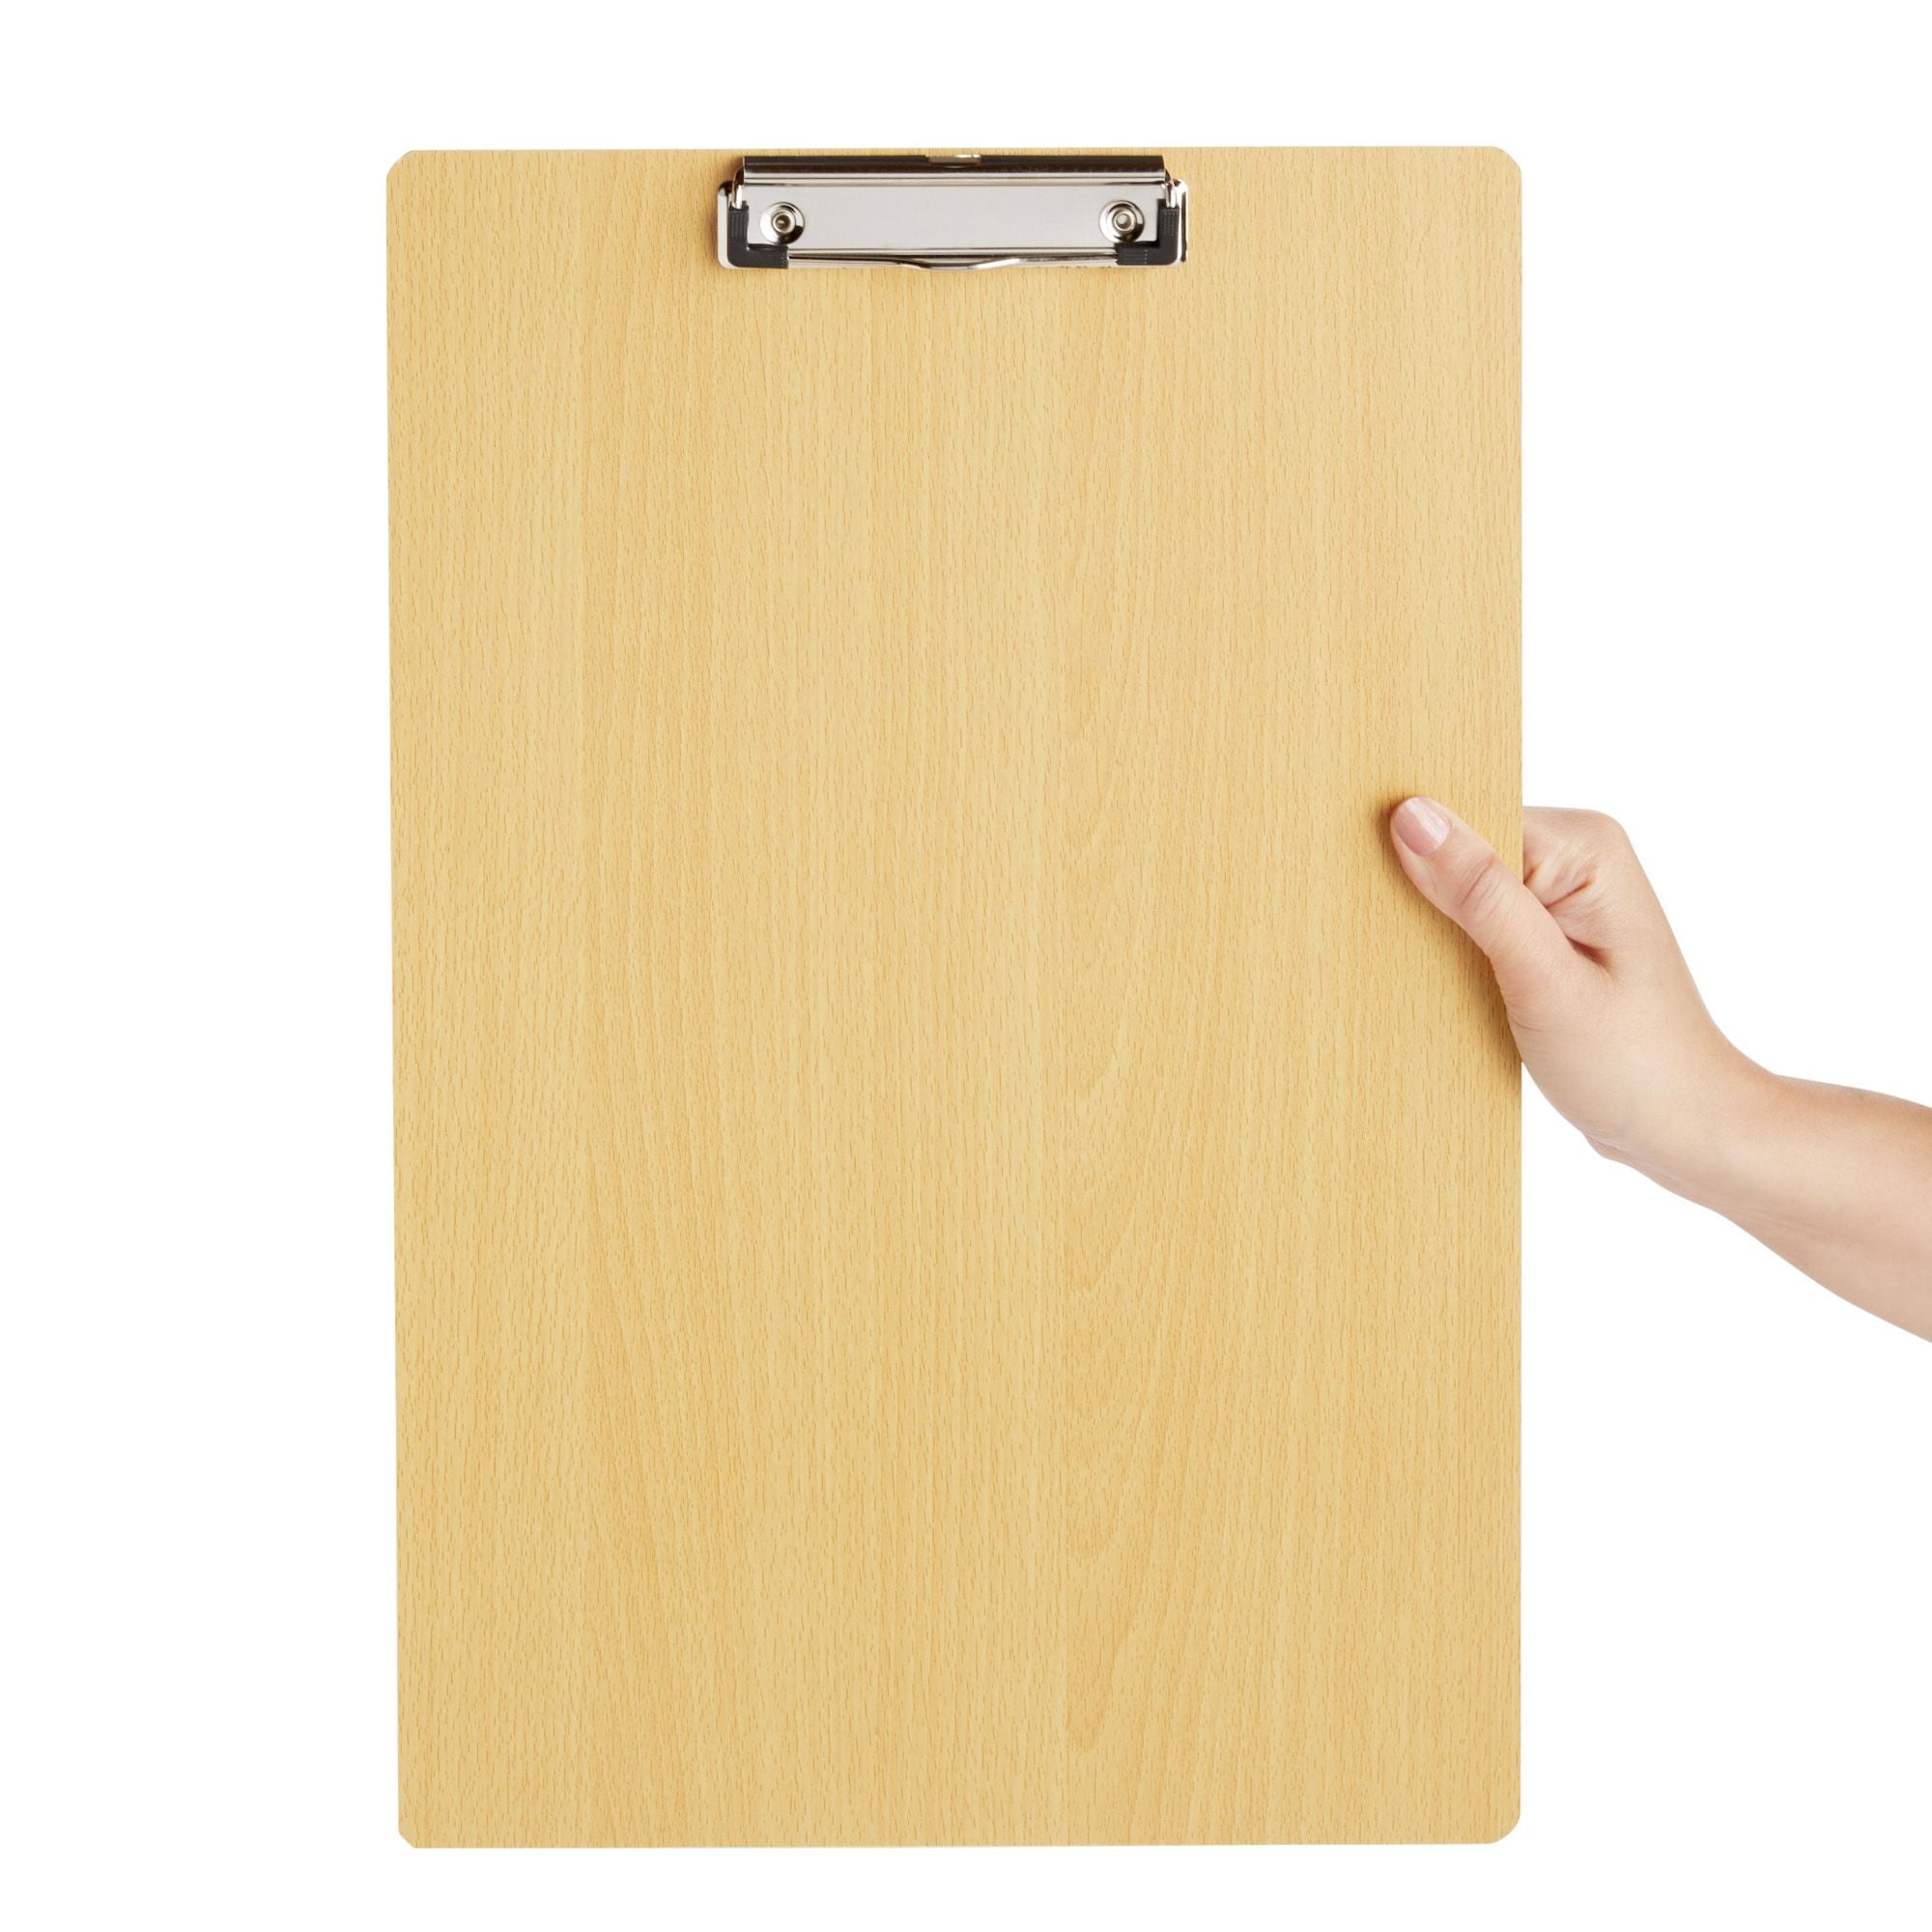 WANGDEFA 2 Pack 12x18 Clipboard Clipboard for Sketching Large Clip Boards Extra Large Clipboard 12x18 with 3 Clip Large Clipboard 12x18 for Drawing Sketching